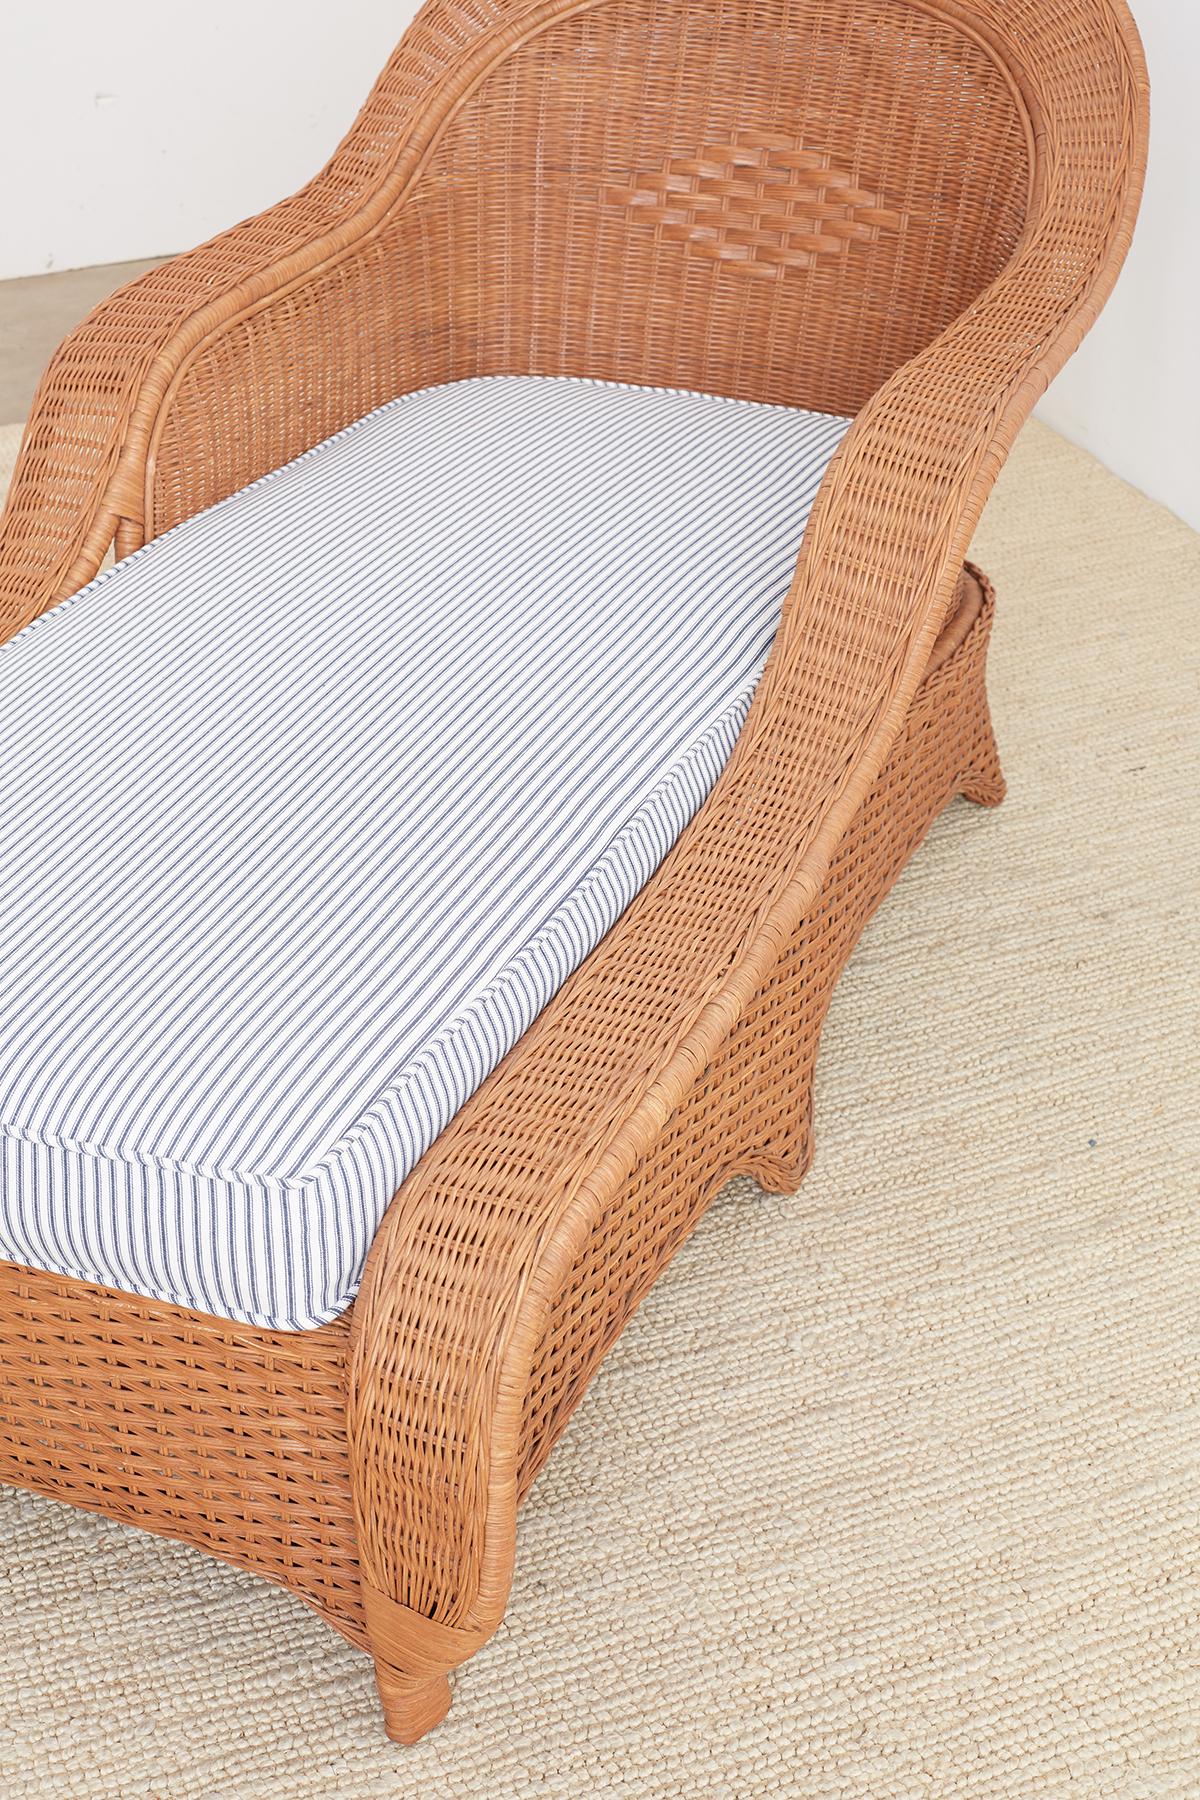 French Style Wicker Chaise Longue with Waverly Ticking Stripe Upholstery 5